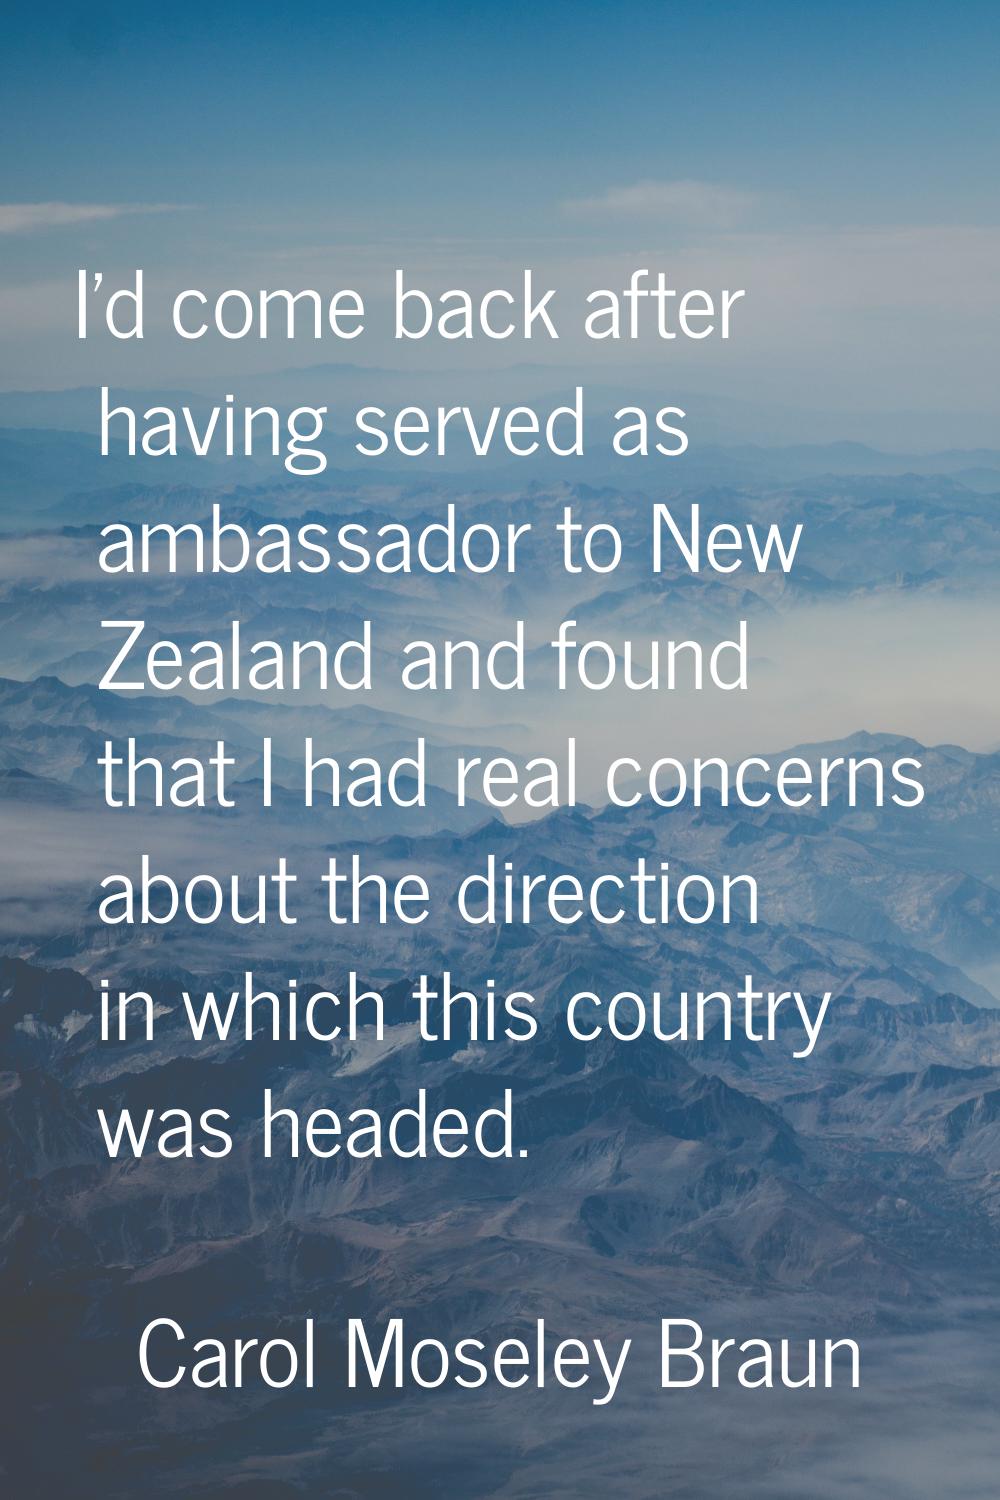 I'd come back after having served as ambassador to New Zealand and found that I had real concerns a